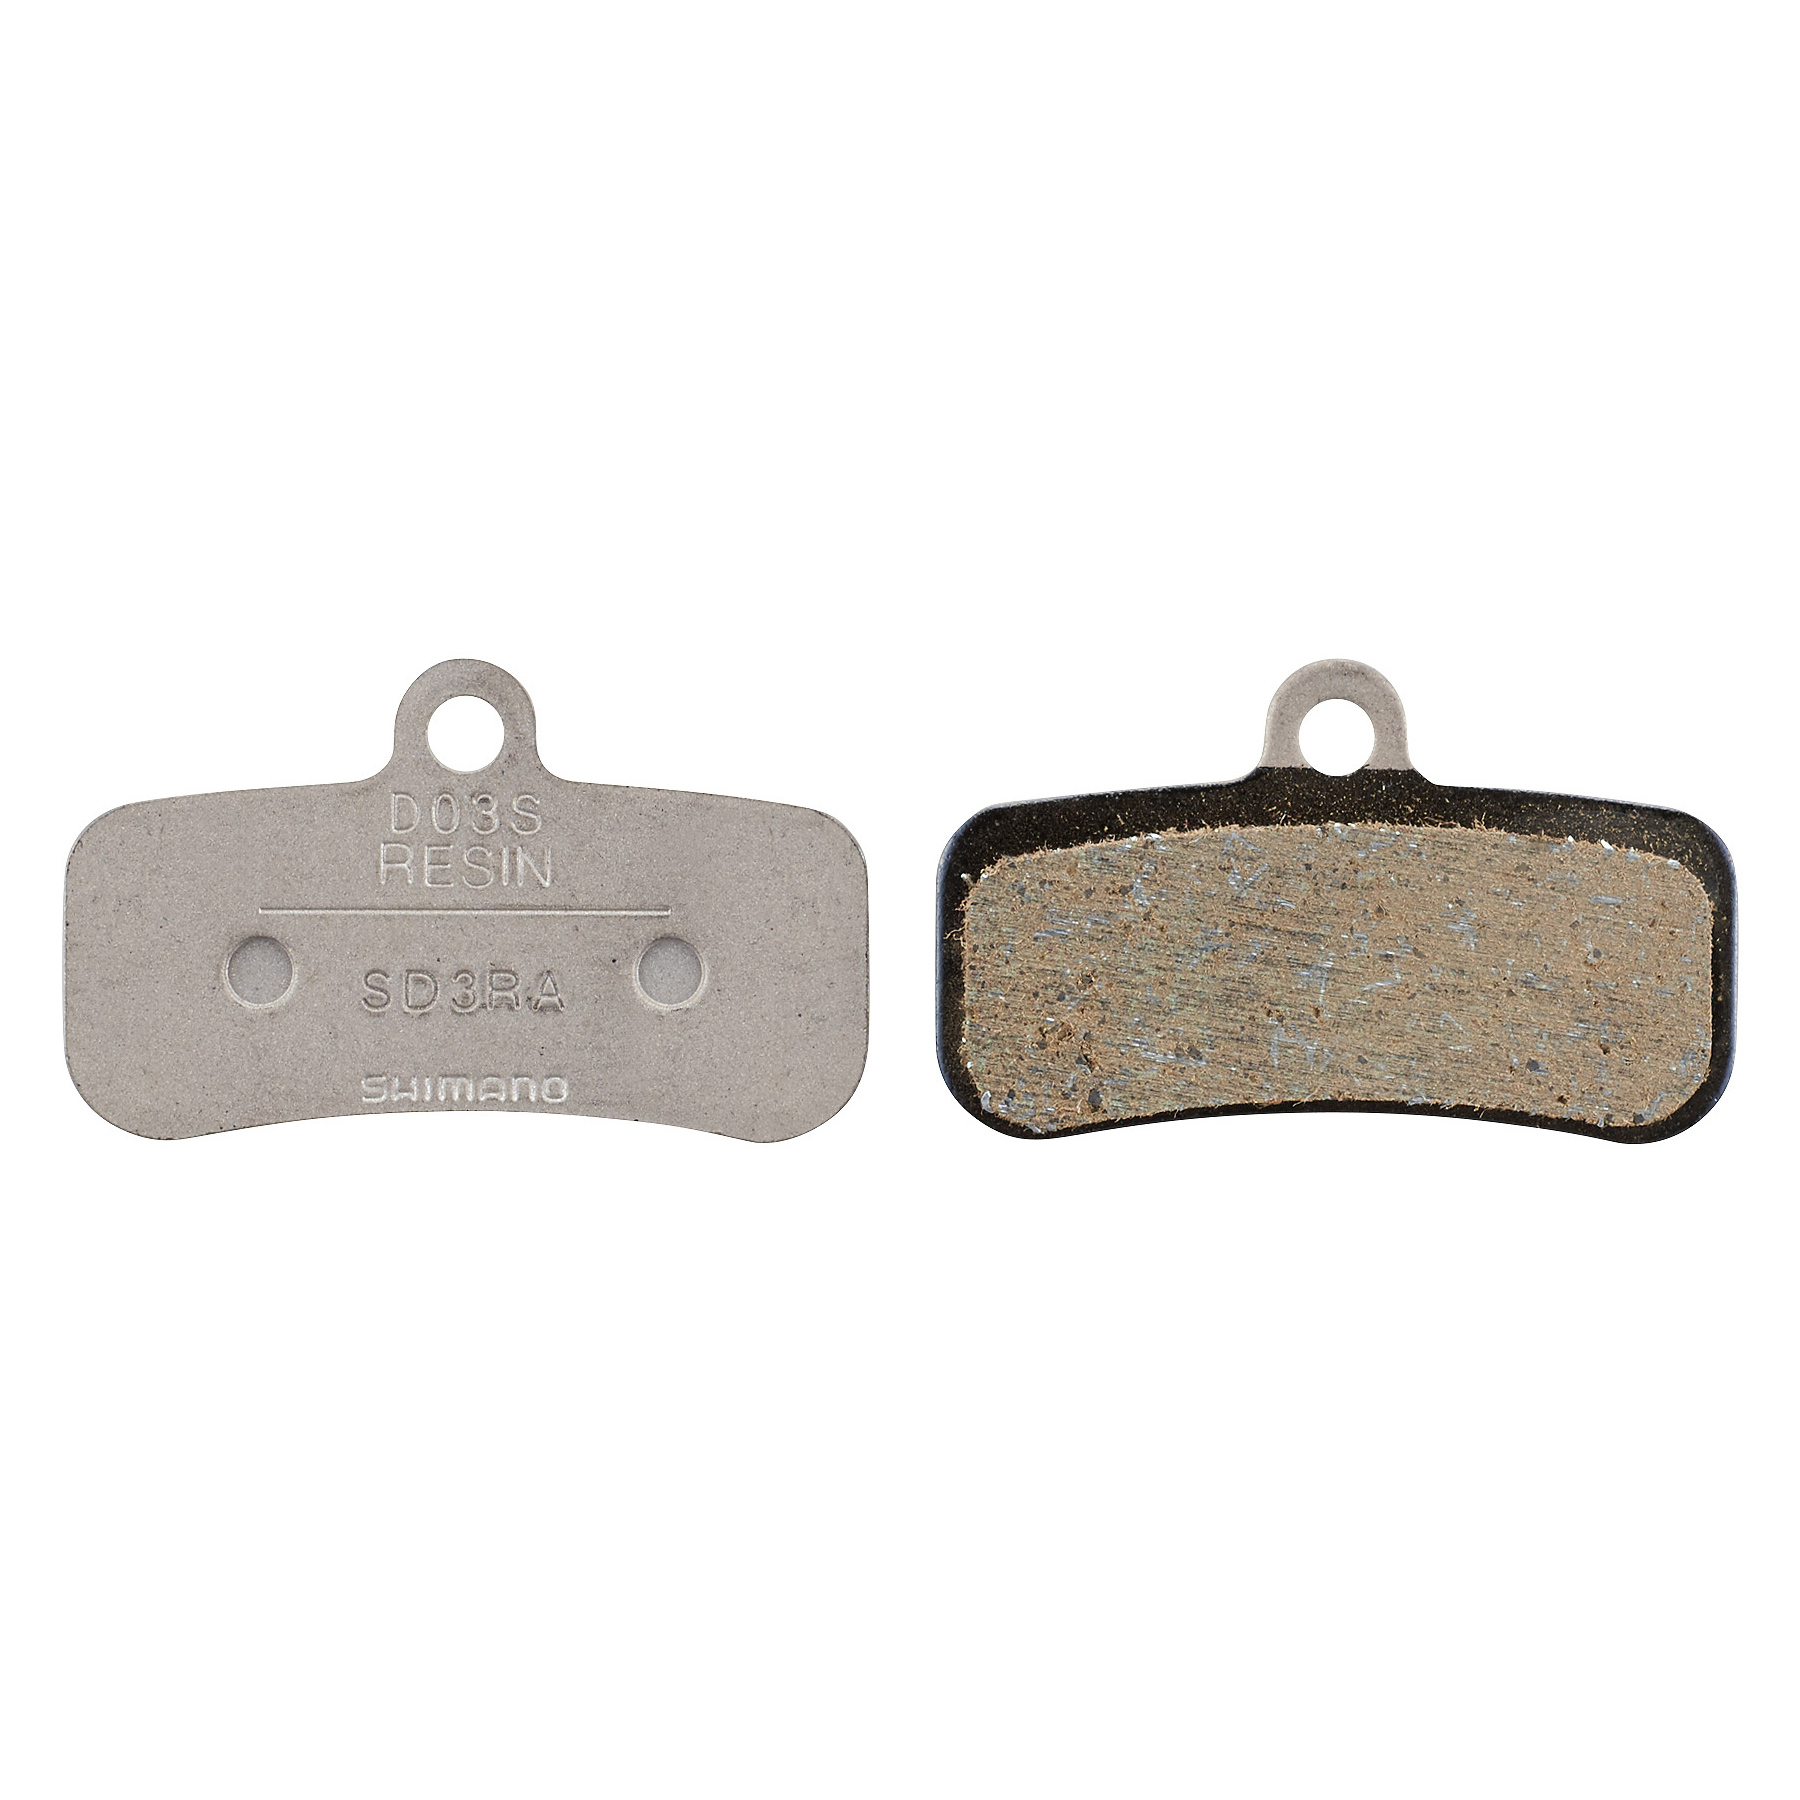 Picture of Shimano Disc Brake Pads - D03S-RX | Resin